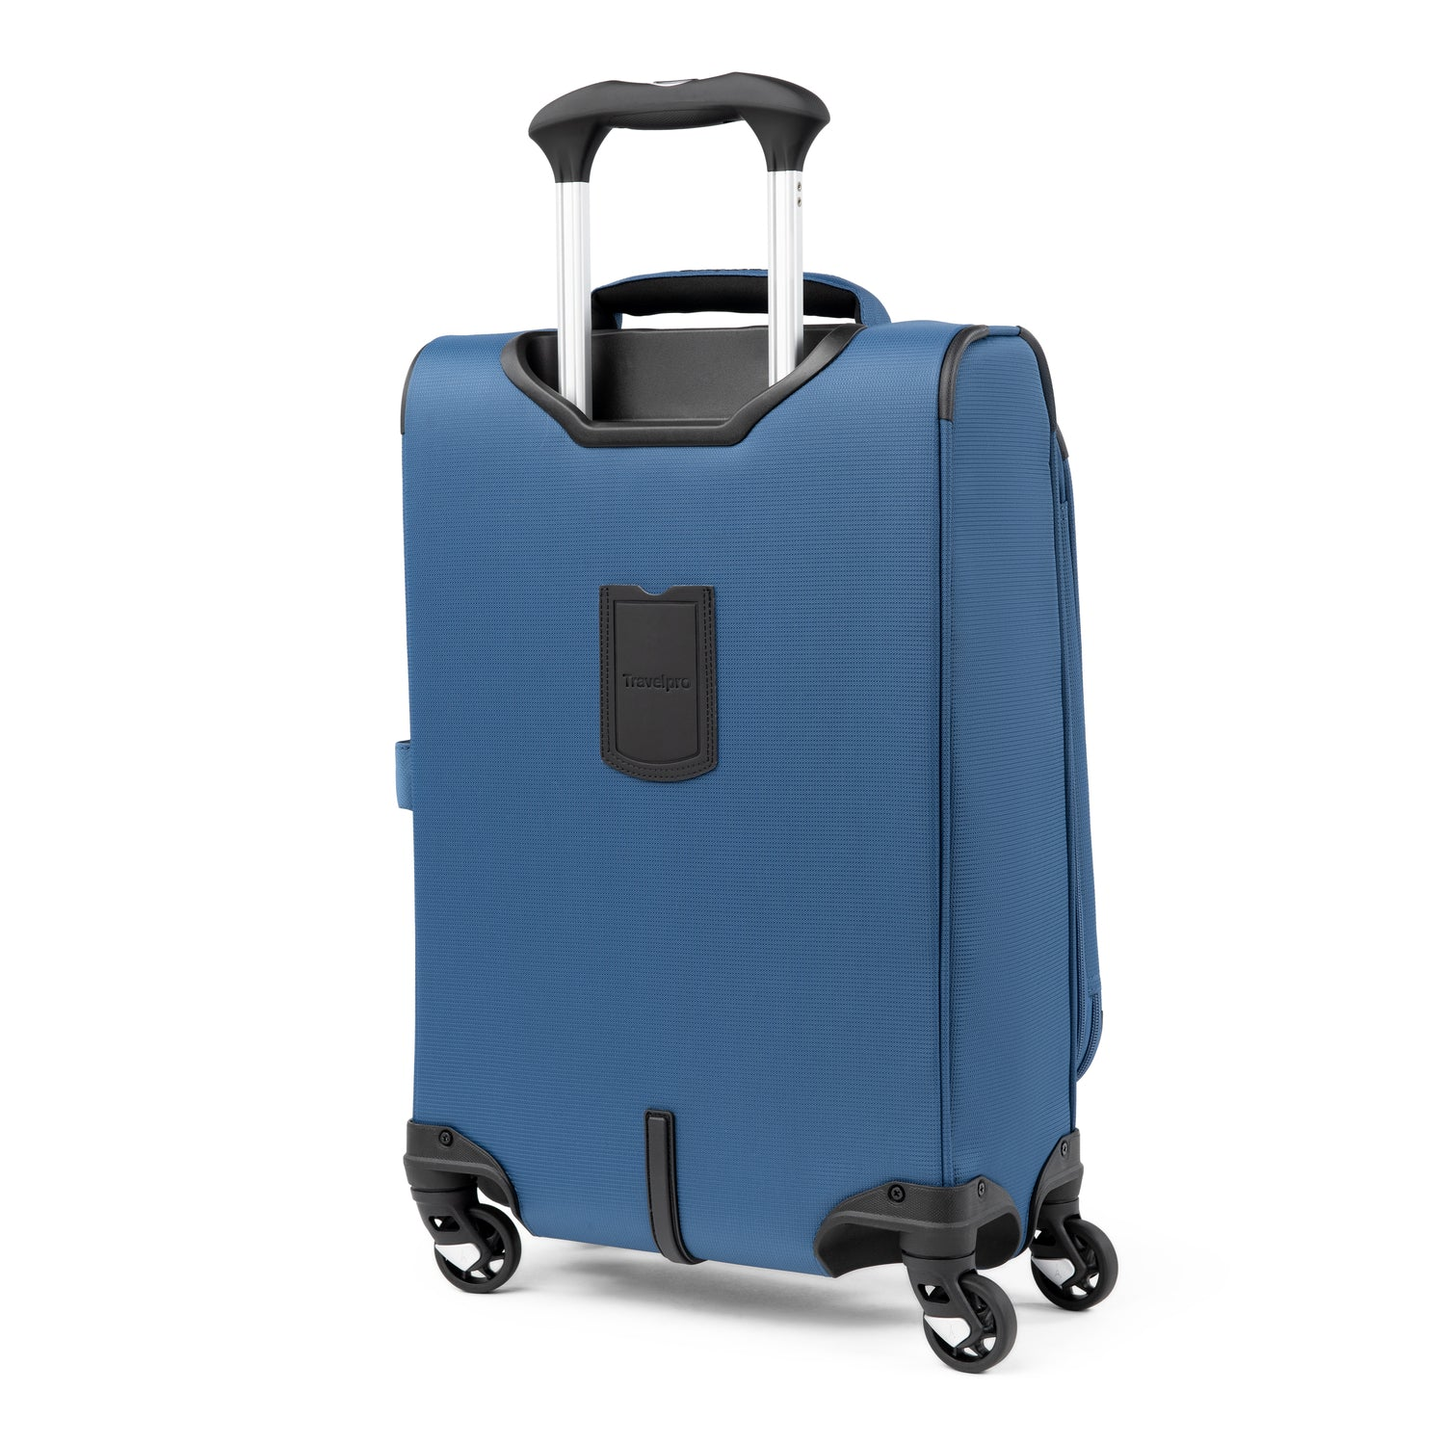 Travelpro Maxlite® 5 Compact Carry-On Expandable Spinner